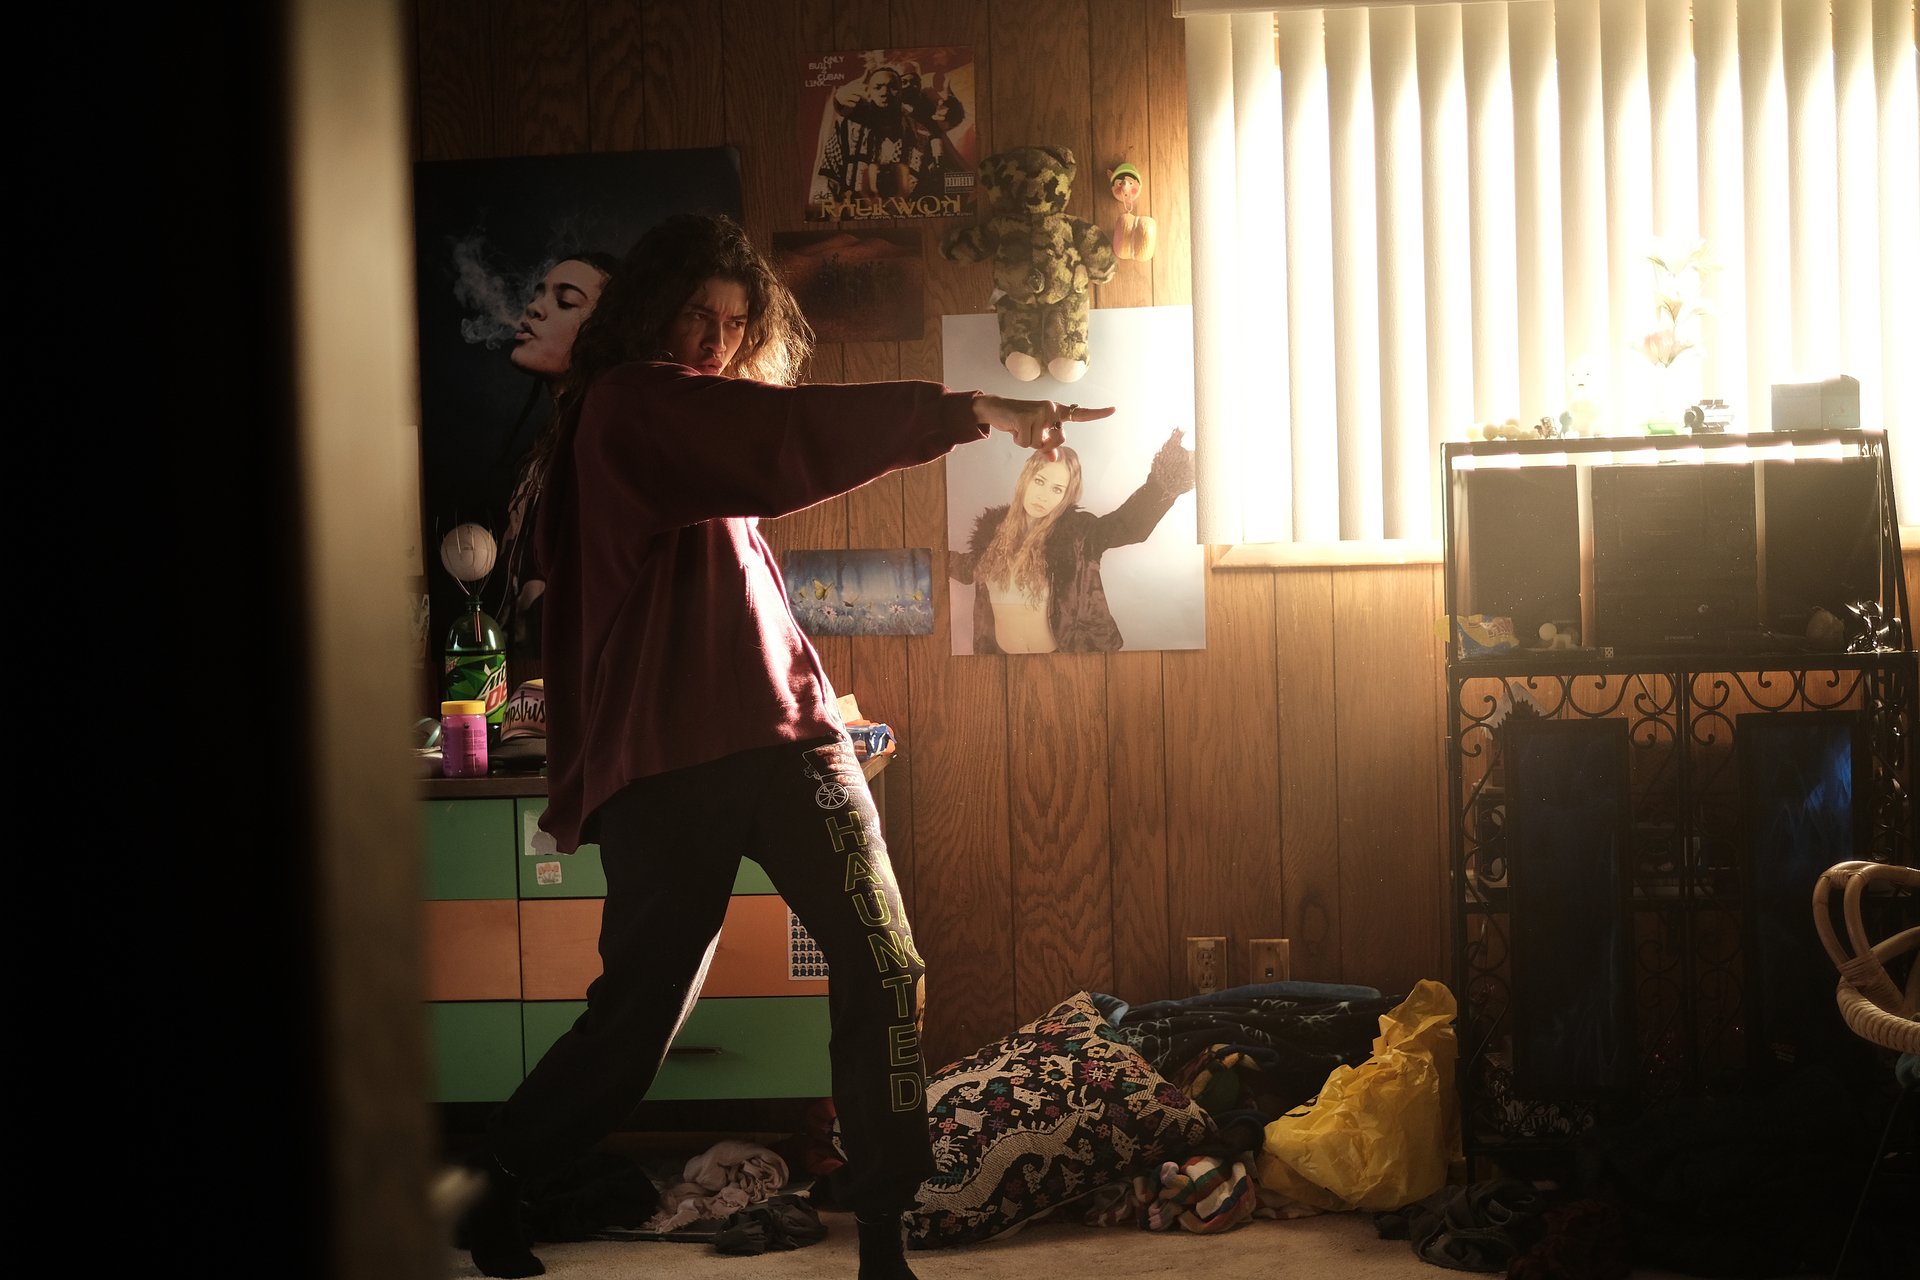 'Euphoria' Season 2's Rue, played by Zendaya, dancing in a production still. Fans continue to wonder, 'Is Euphoria character Rue dead?'